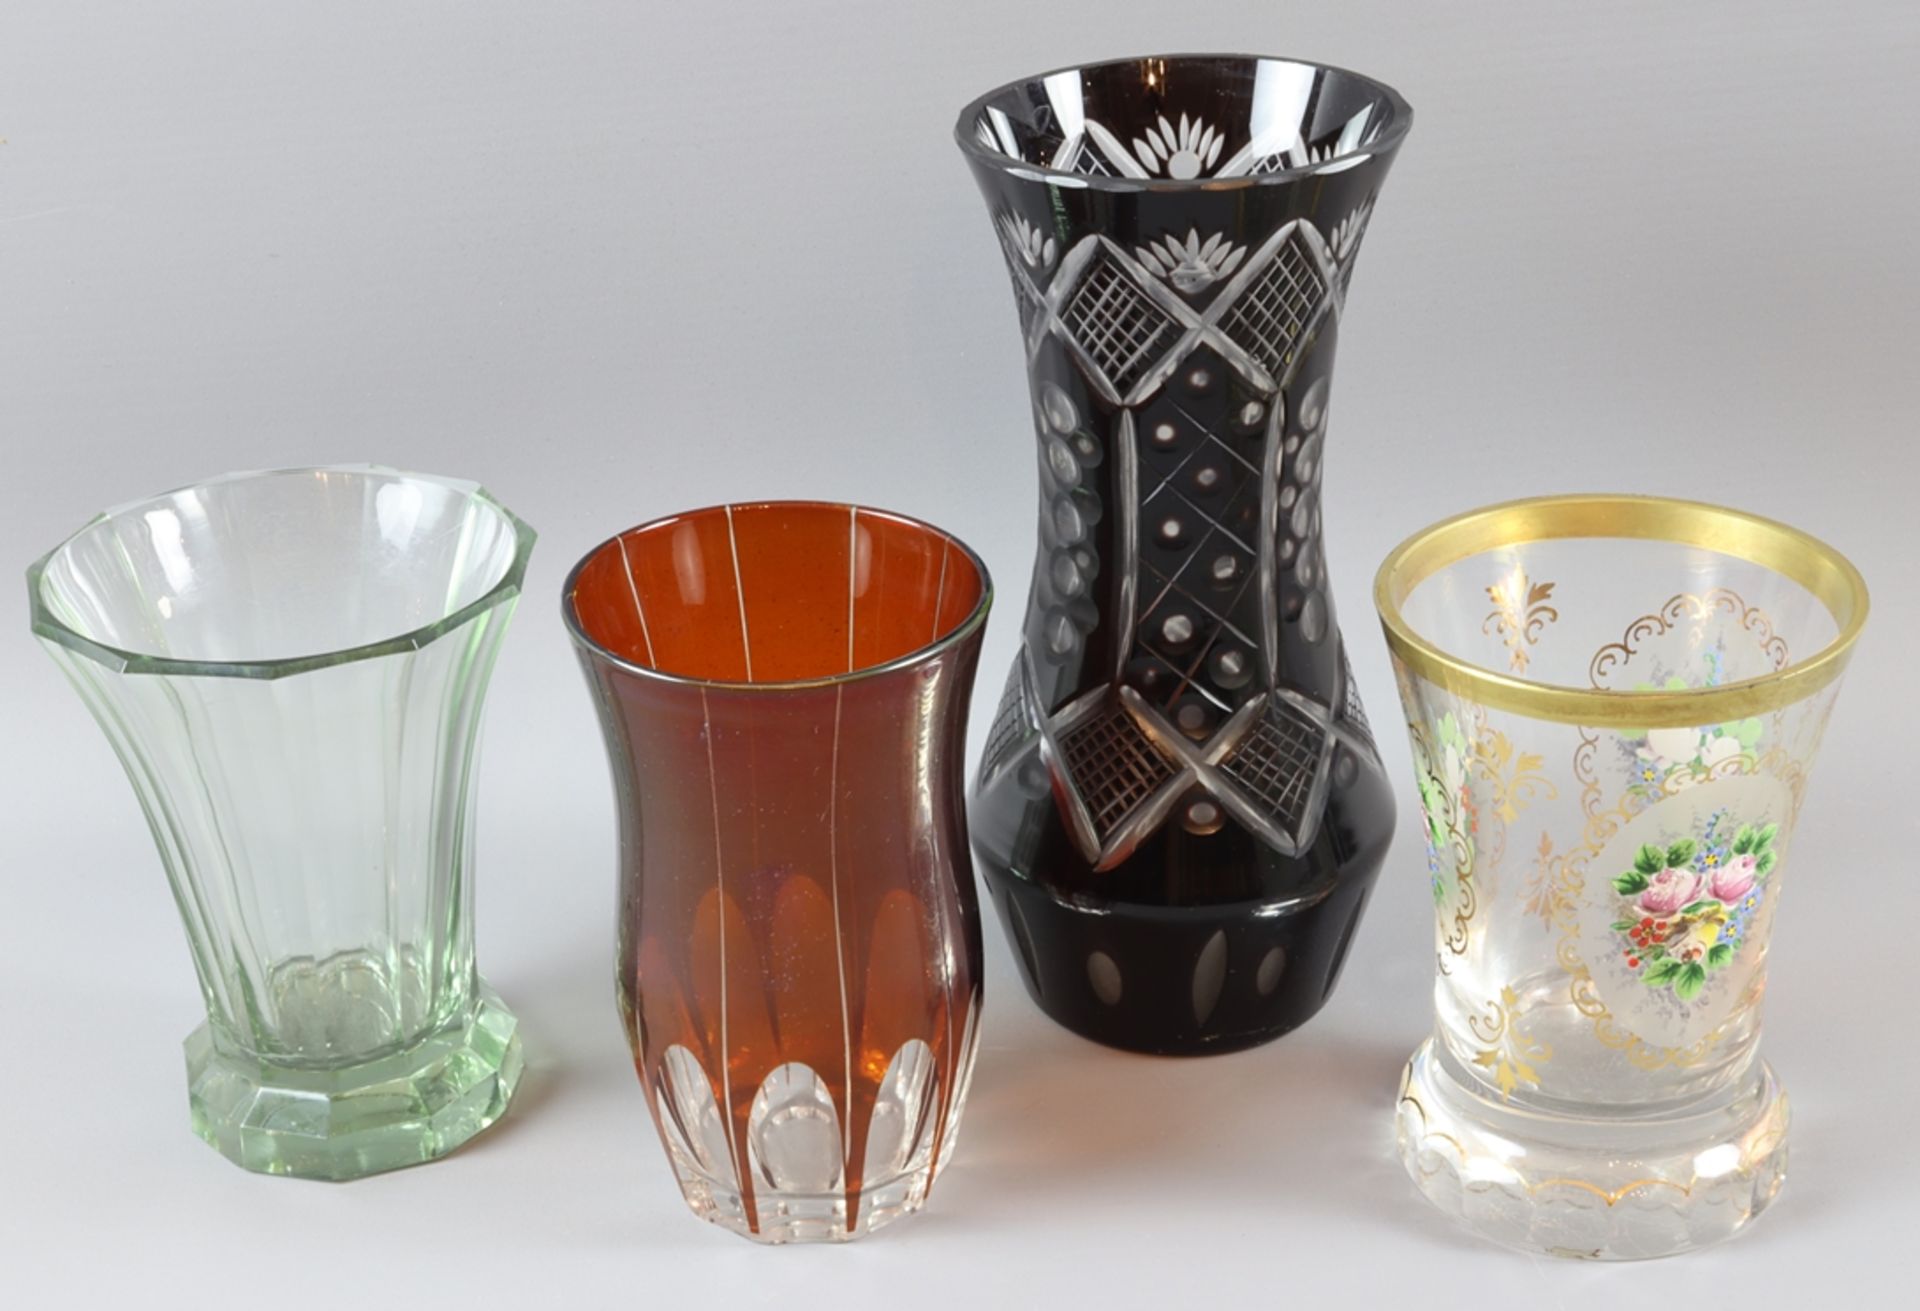 Lot of three different footed tumblers and vases, Bohemia circa 1900-1930, German